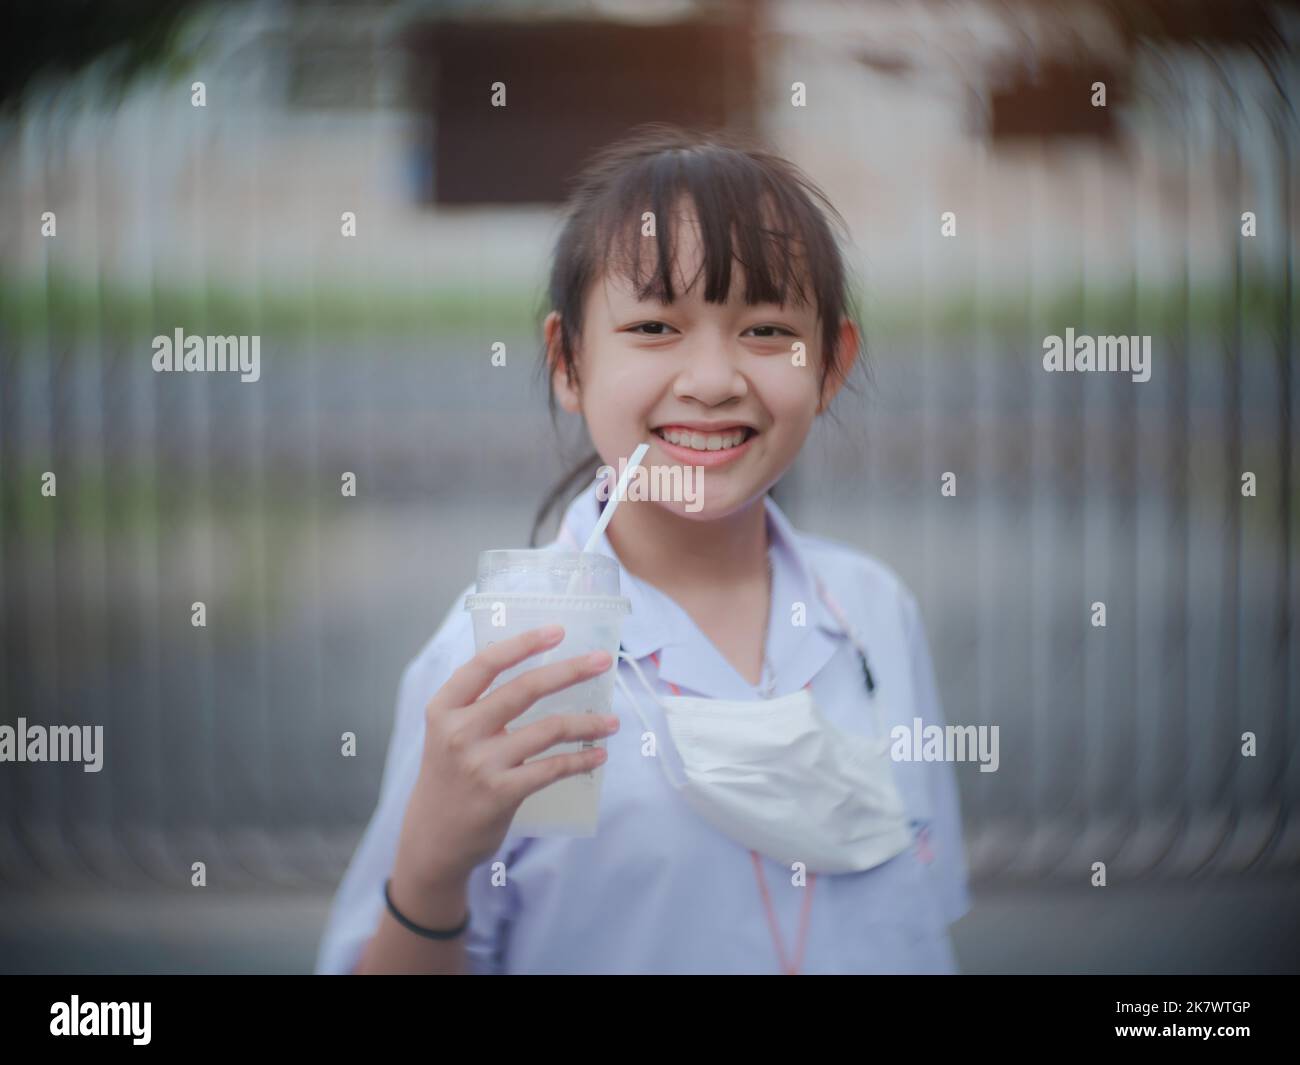 The female student smiled and laughed happily after drinking water and finishing school in the evening Stock Photo